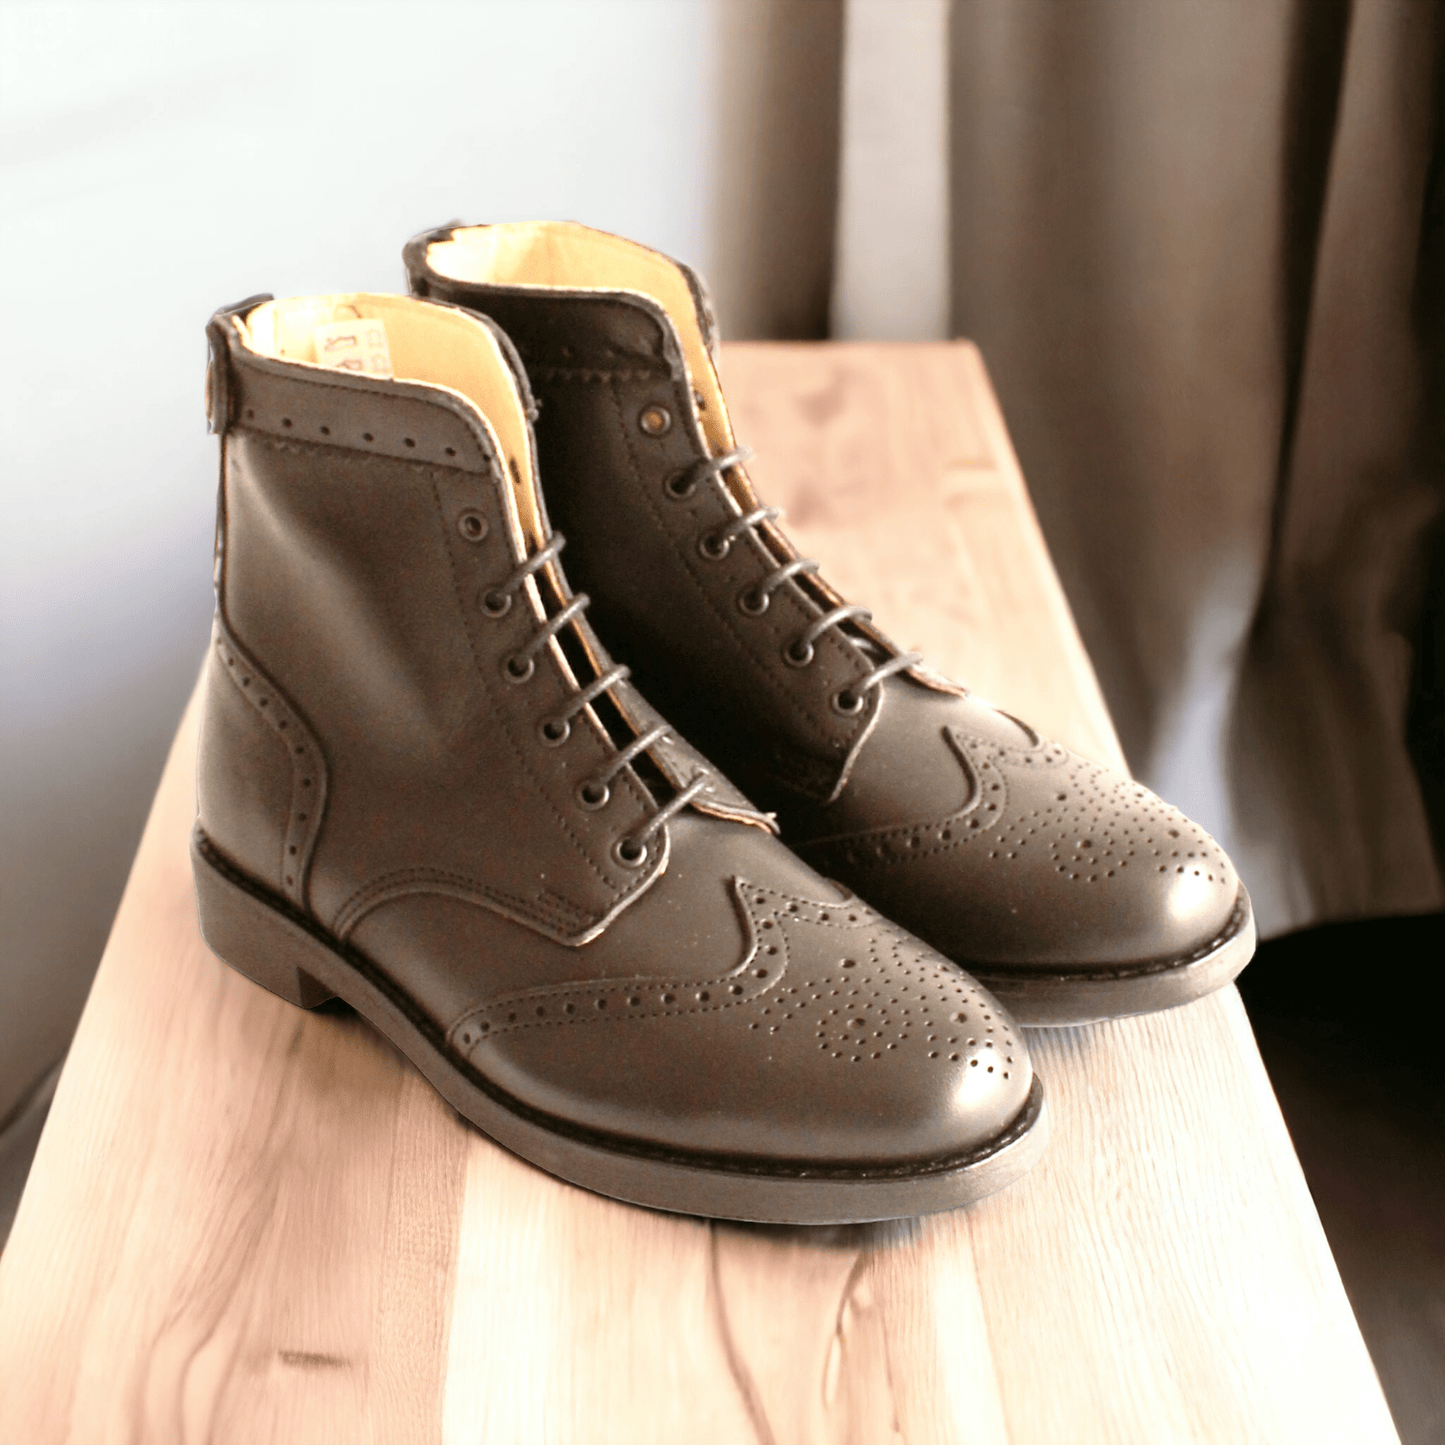 Guadiana Black Boots - OldMulla - Boots Store, Handmade By George Family